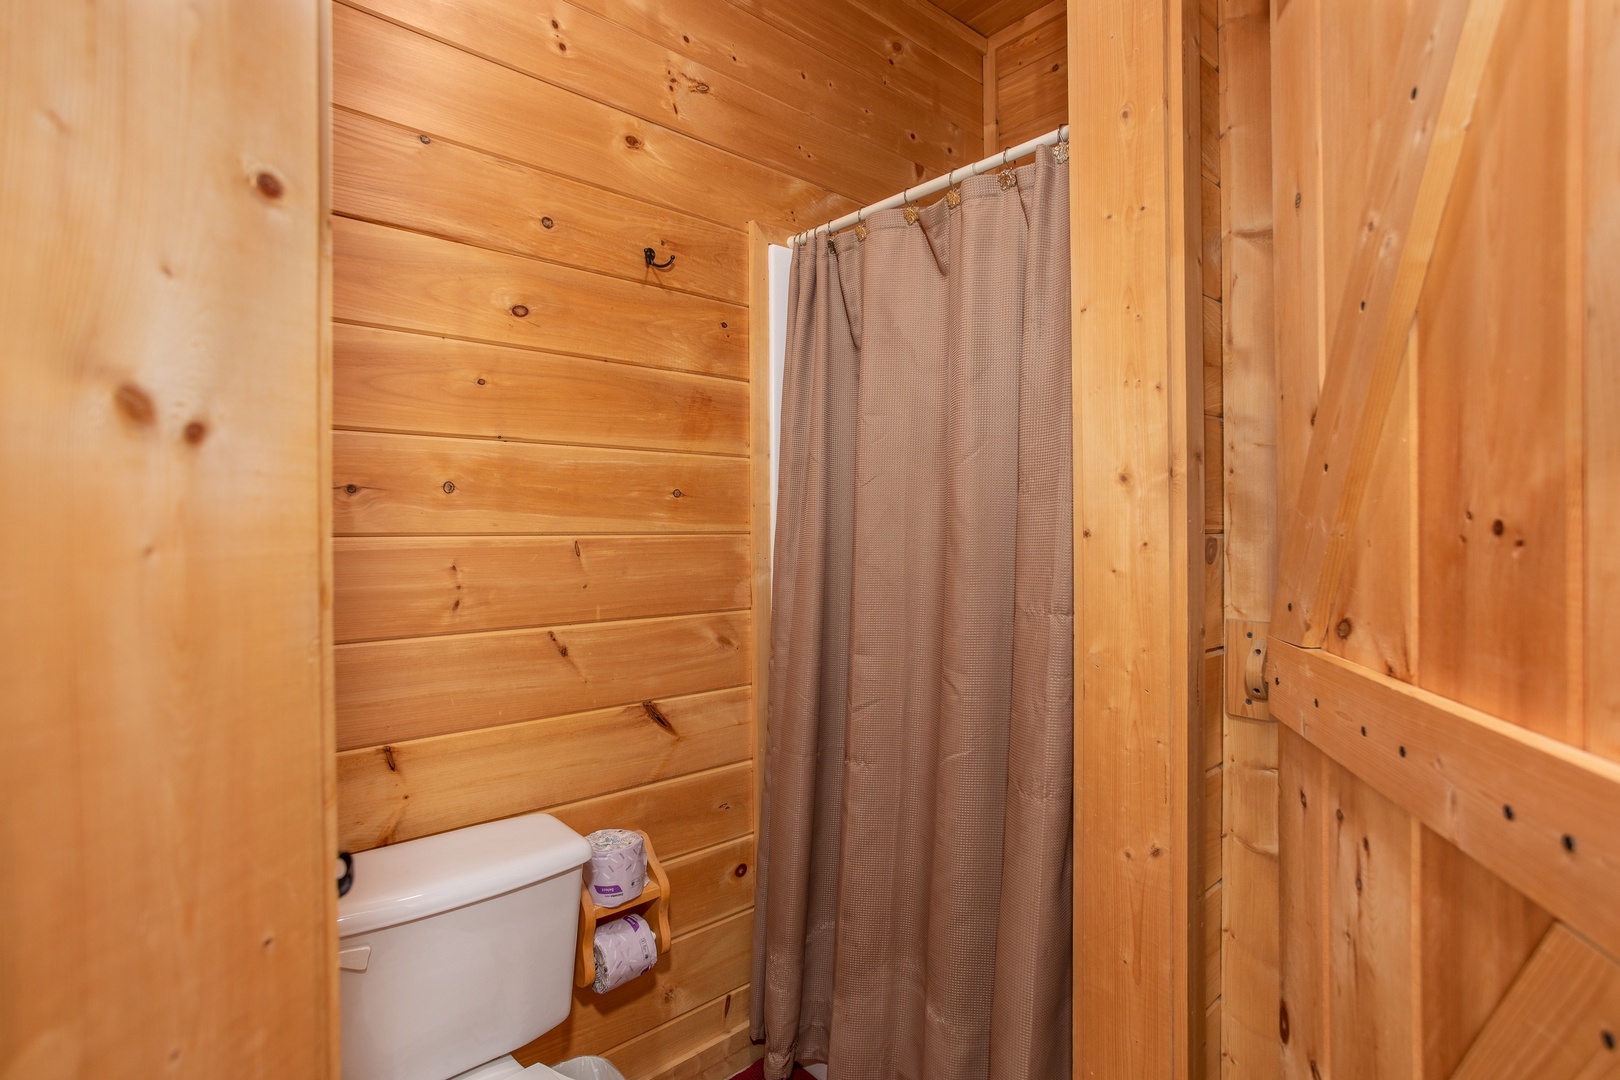 Second bathroom with a separate shower at Bearly in the Mountains, a 5-bedroom cabin rental located in Pigeon Forge